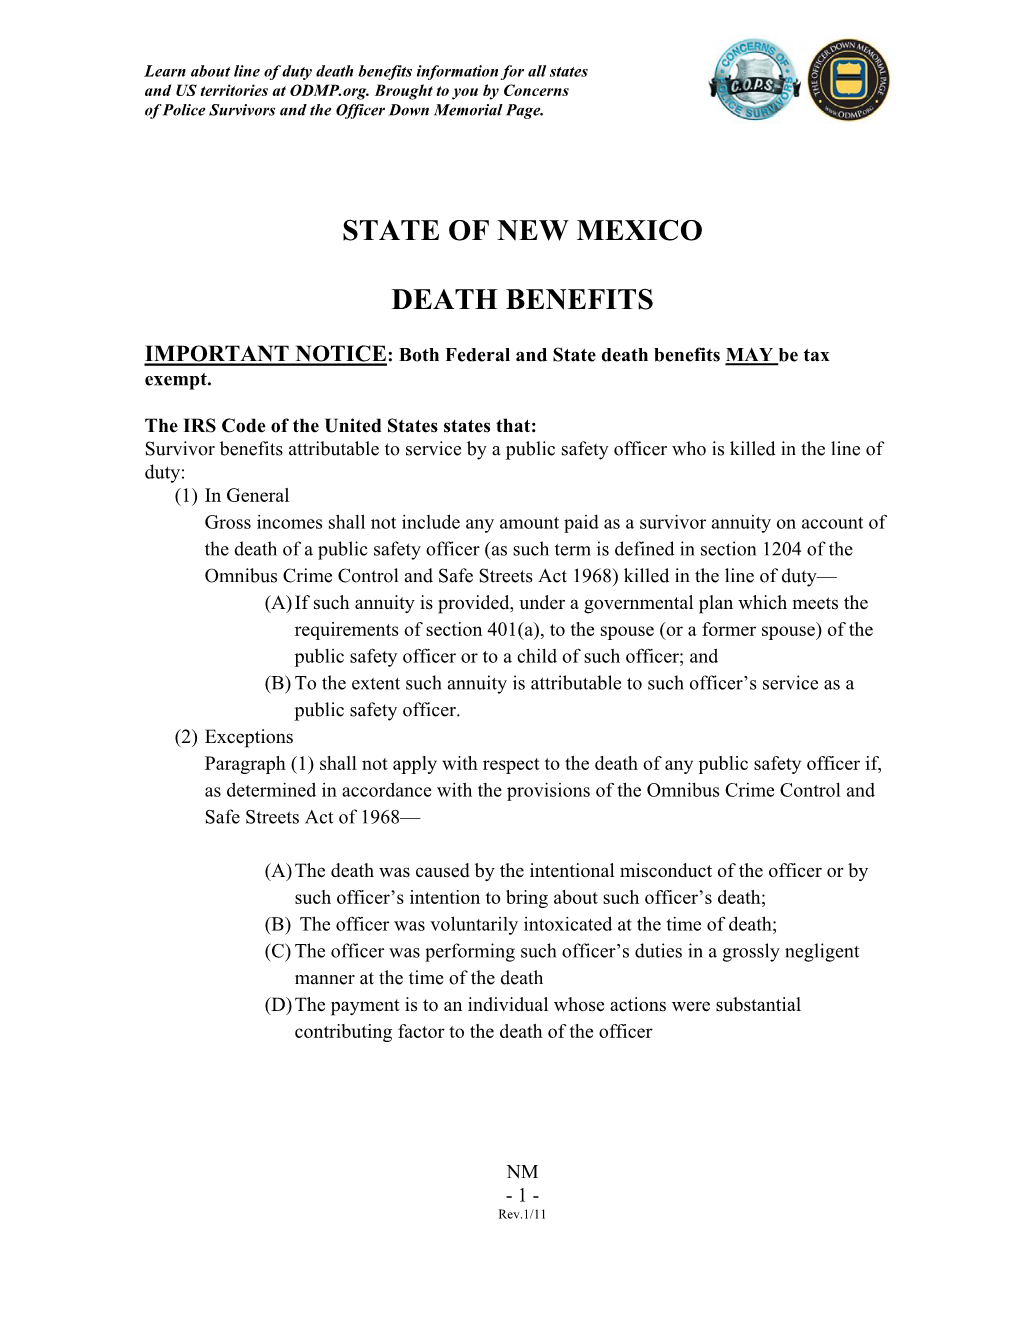 State of New Mexico Death Benefits